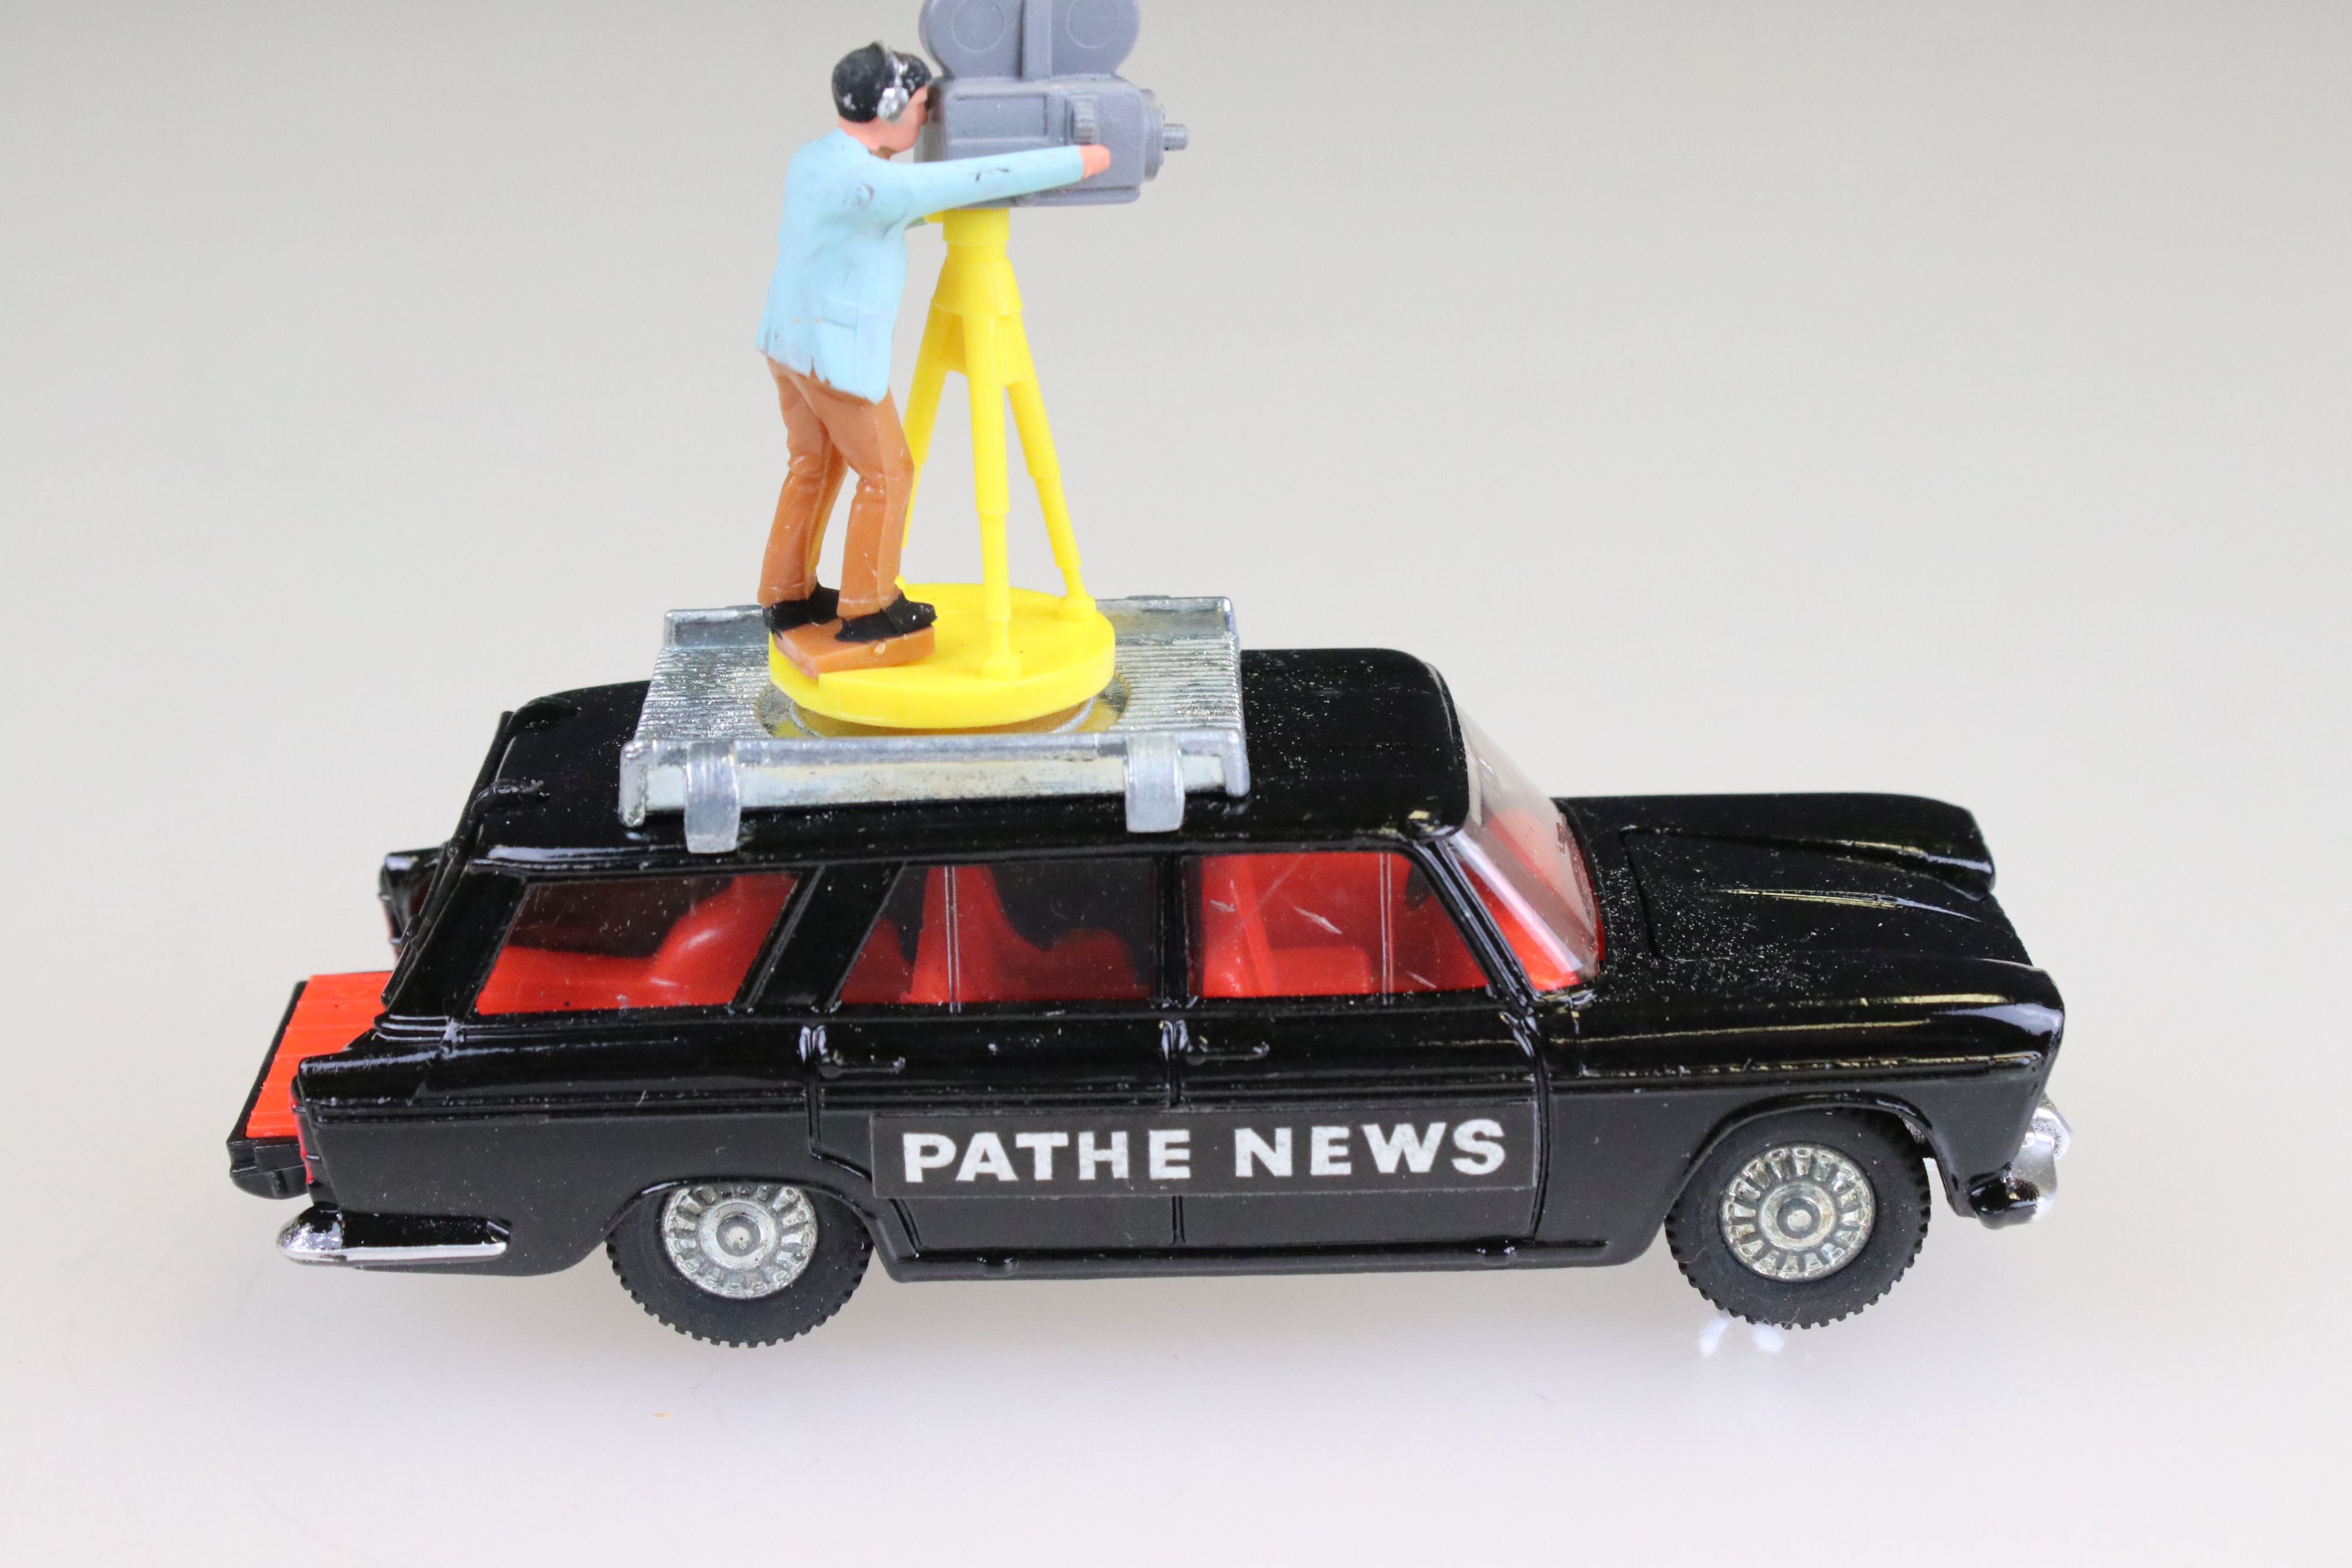 Boxed Dinky 281 Pathe News Camera Car diecast model complete with cameraman figure, diecast & decals - Image 4 of 12